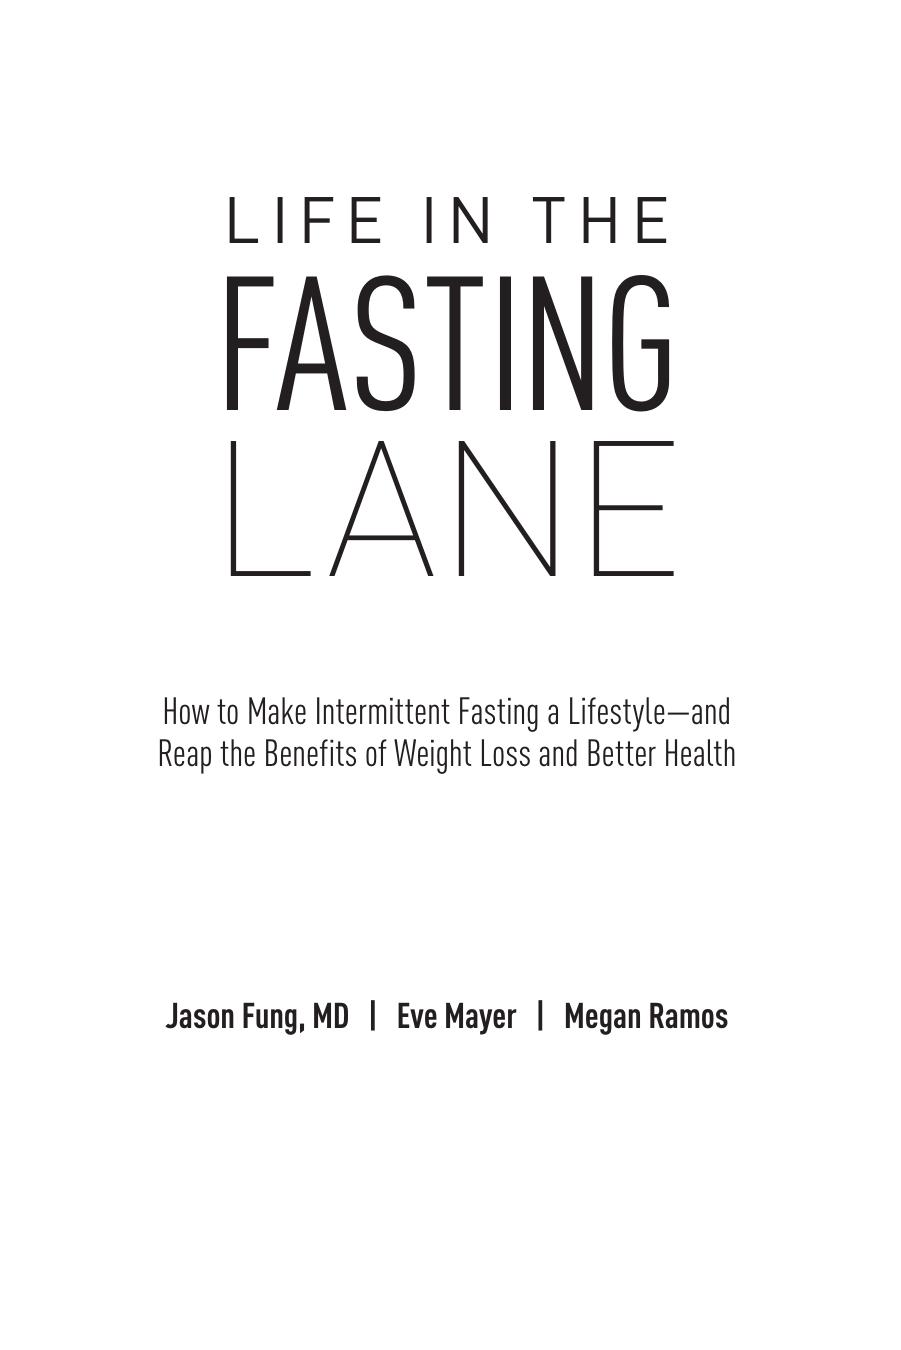 Life in the Fasting Lane by Jason Fung